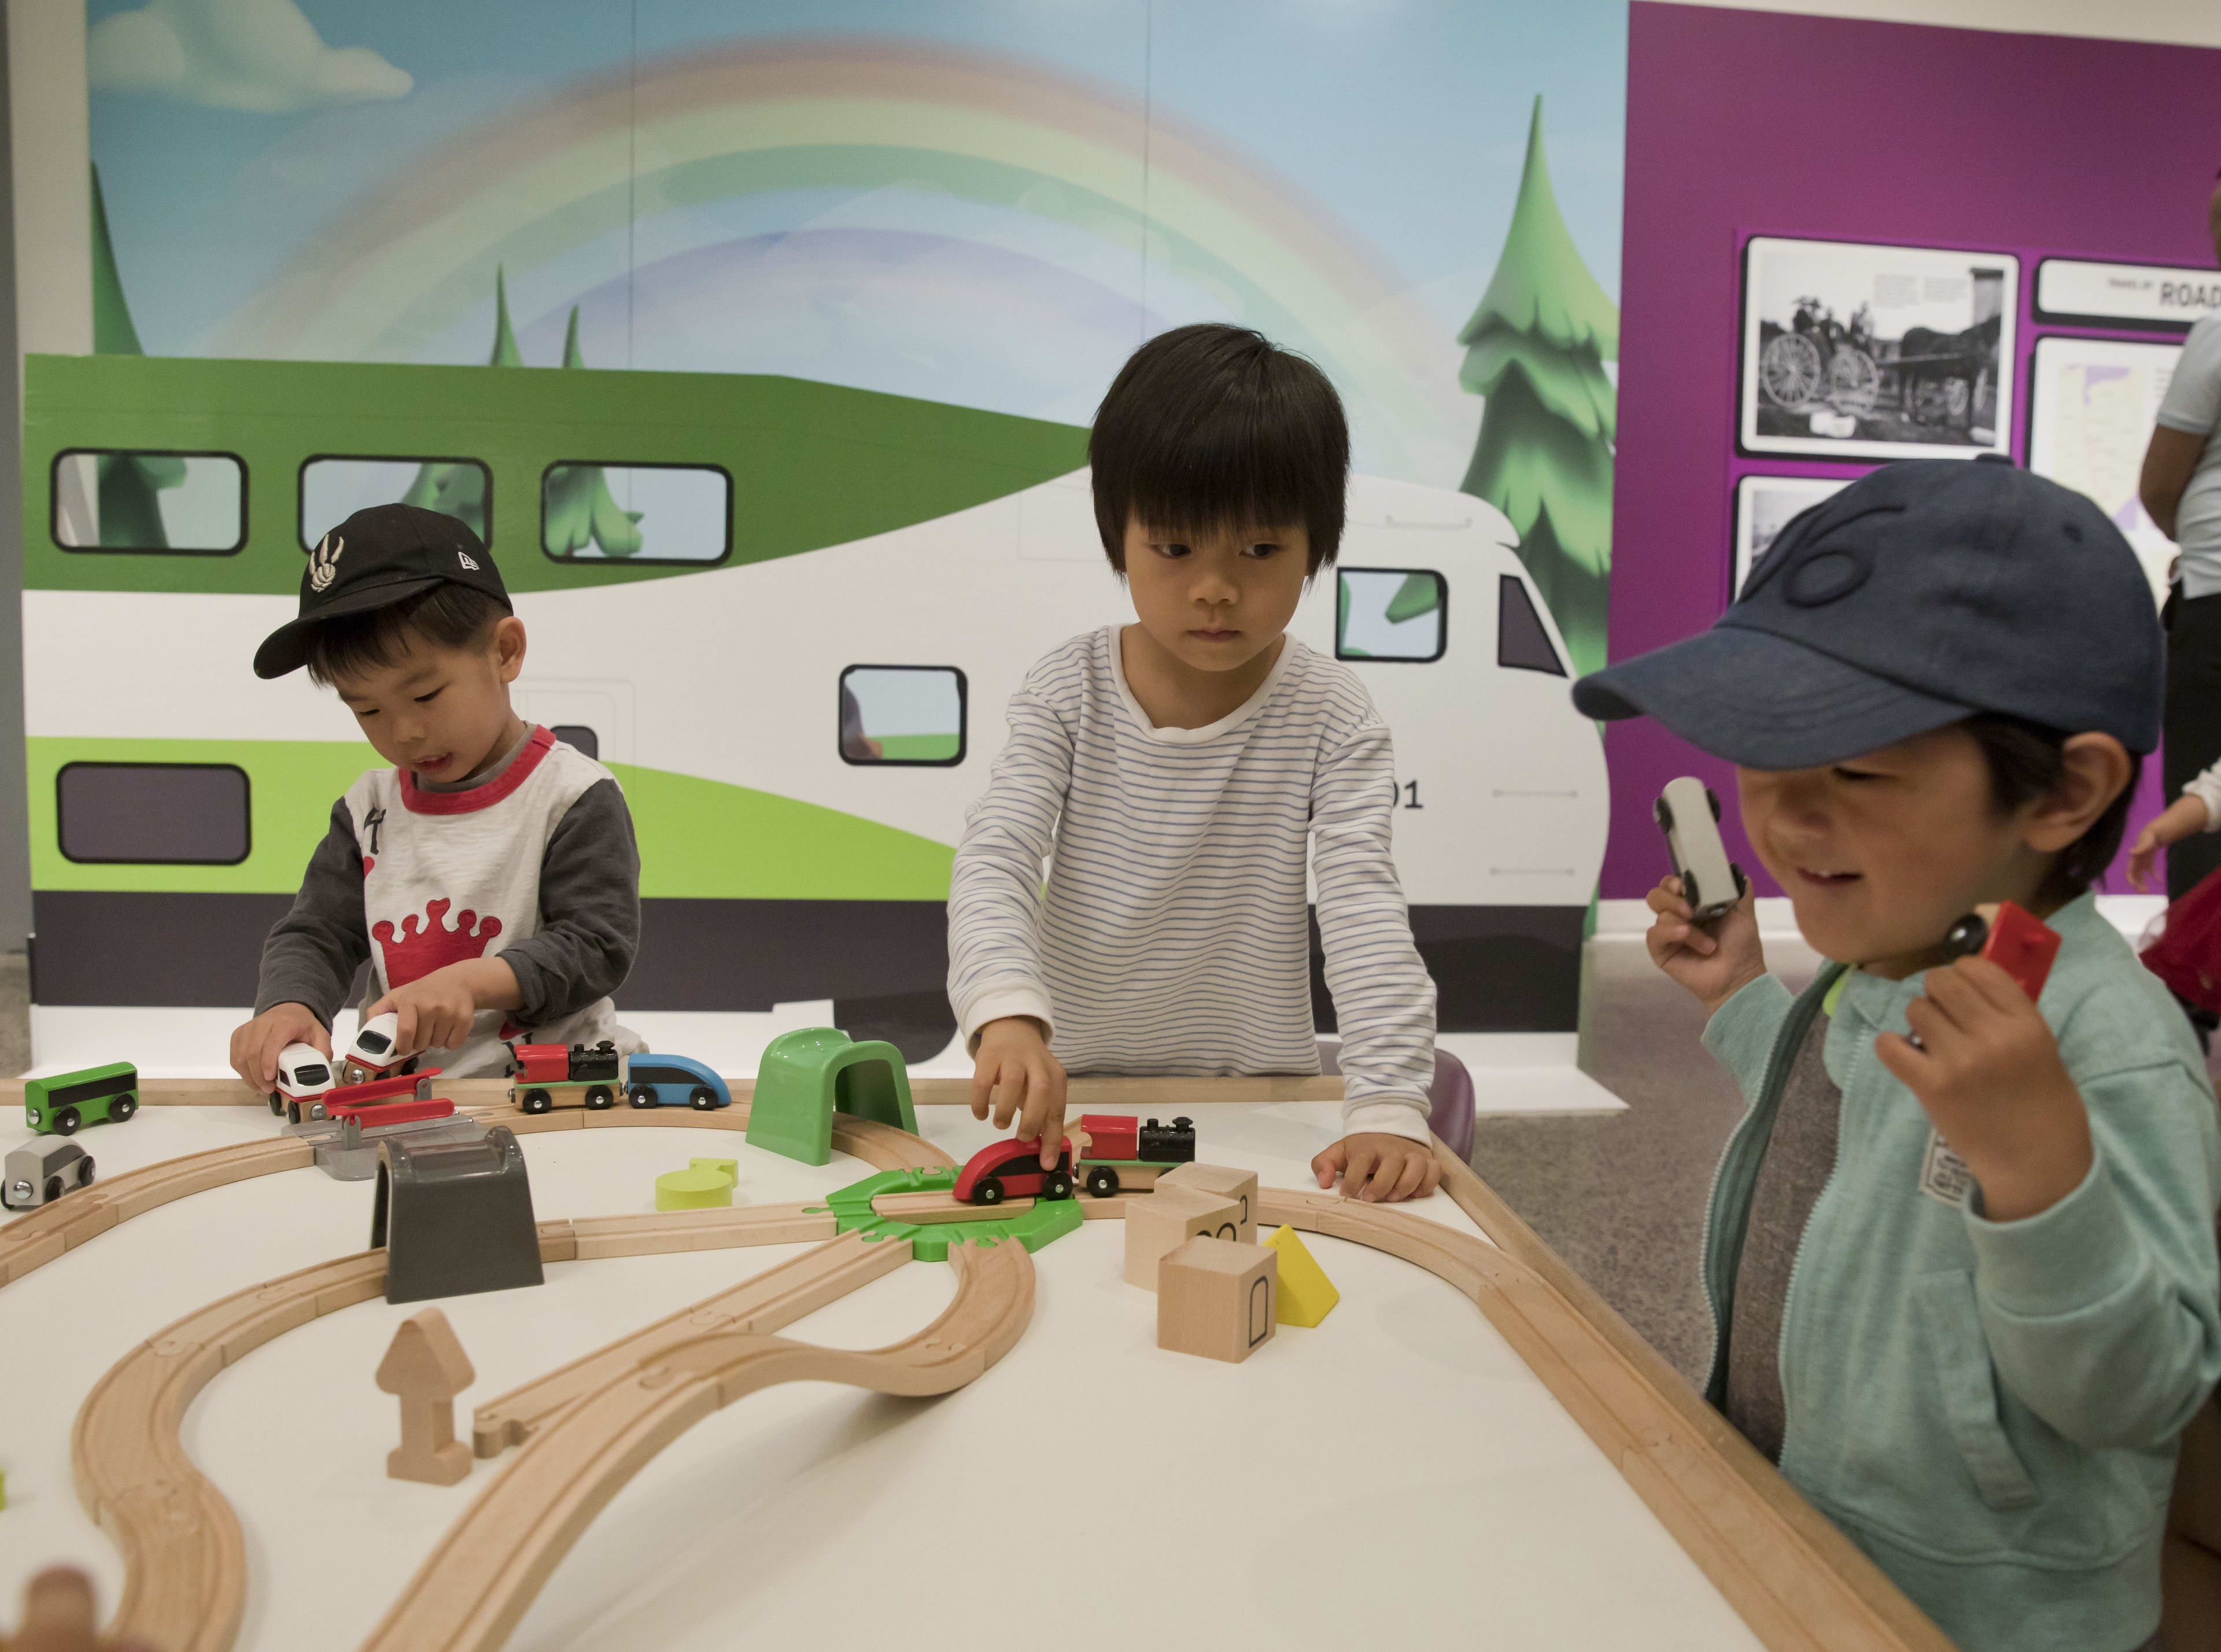 Three children play with cars and a wooden roadway on an activity table.